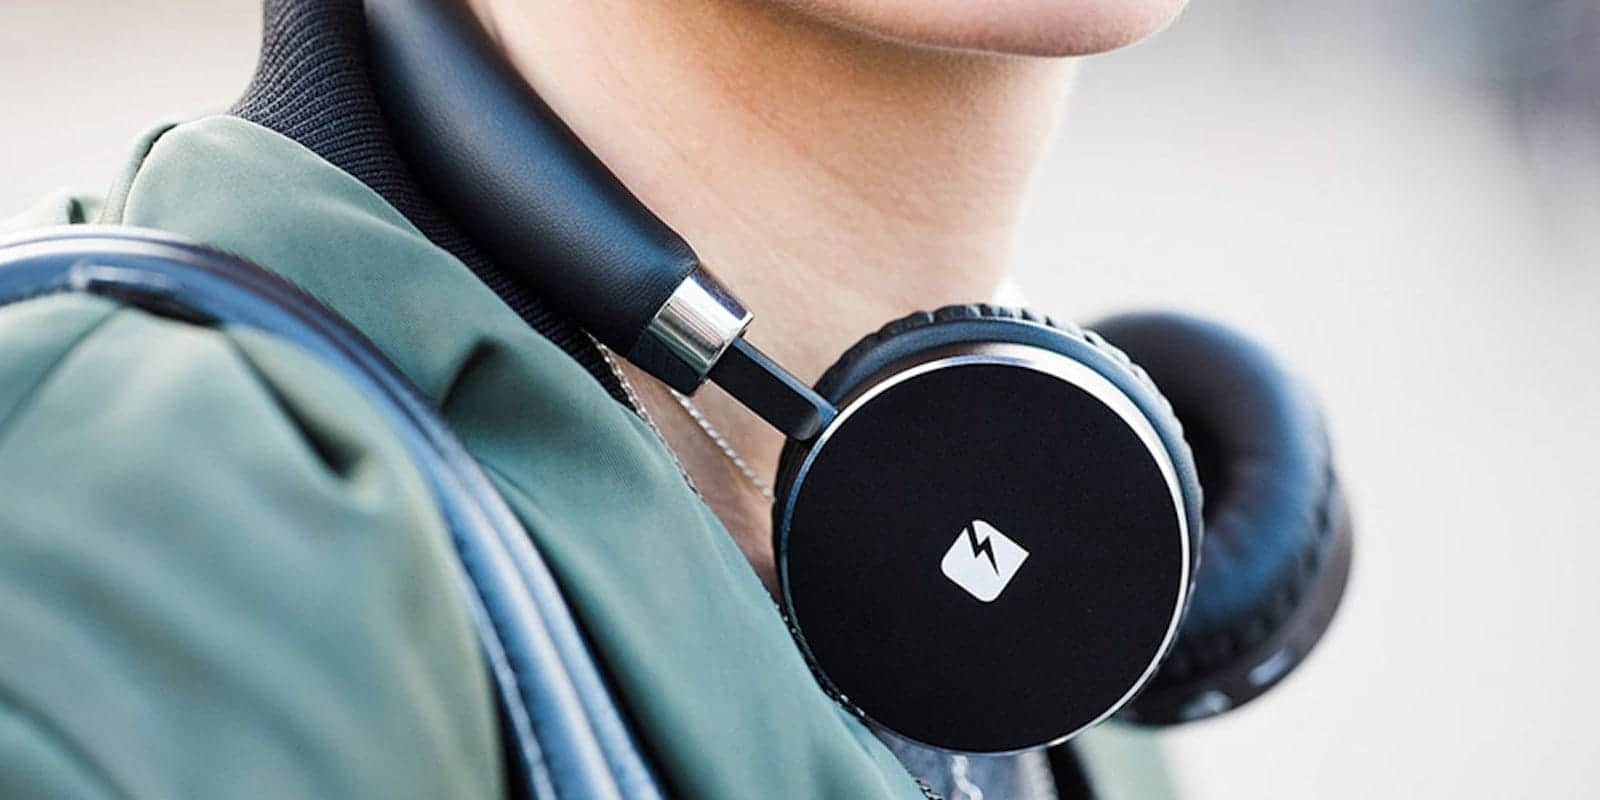 These headphones are totally wireless. Plus they look, feel, and sound great.